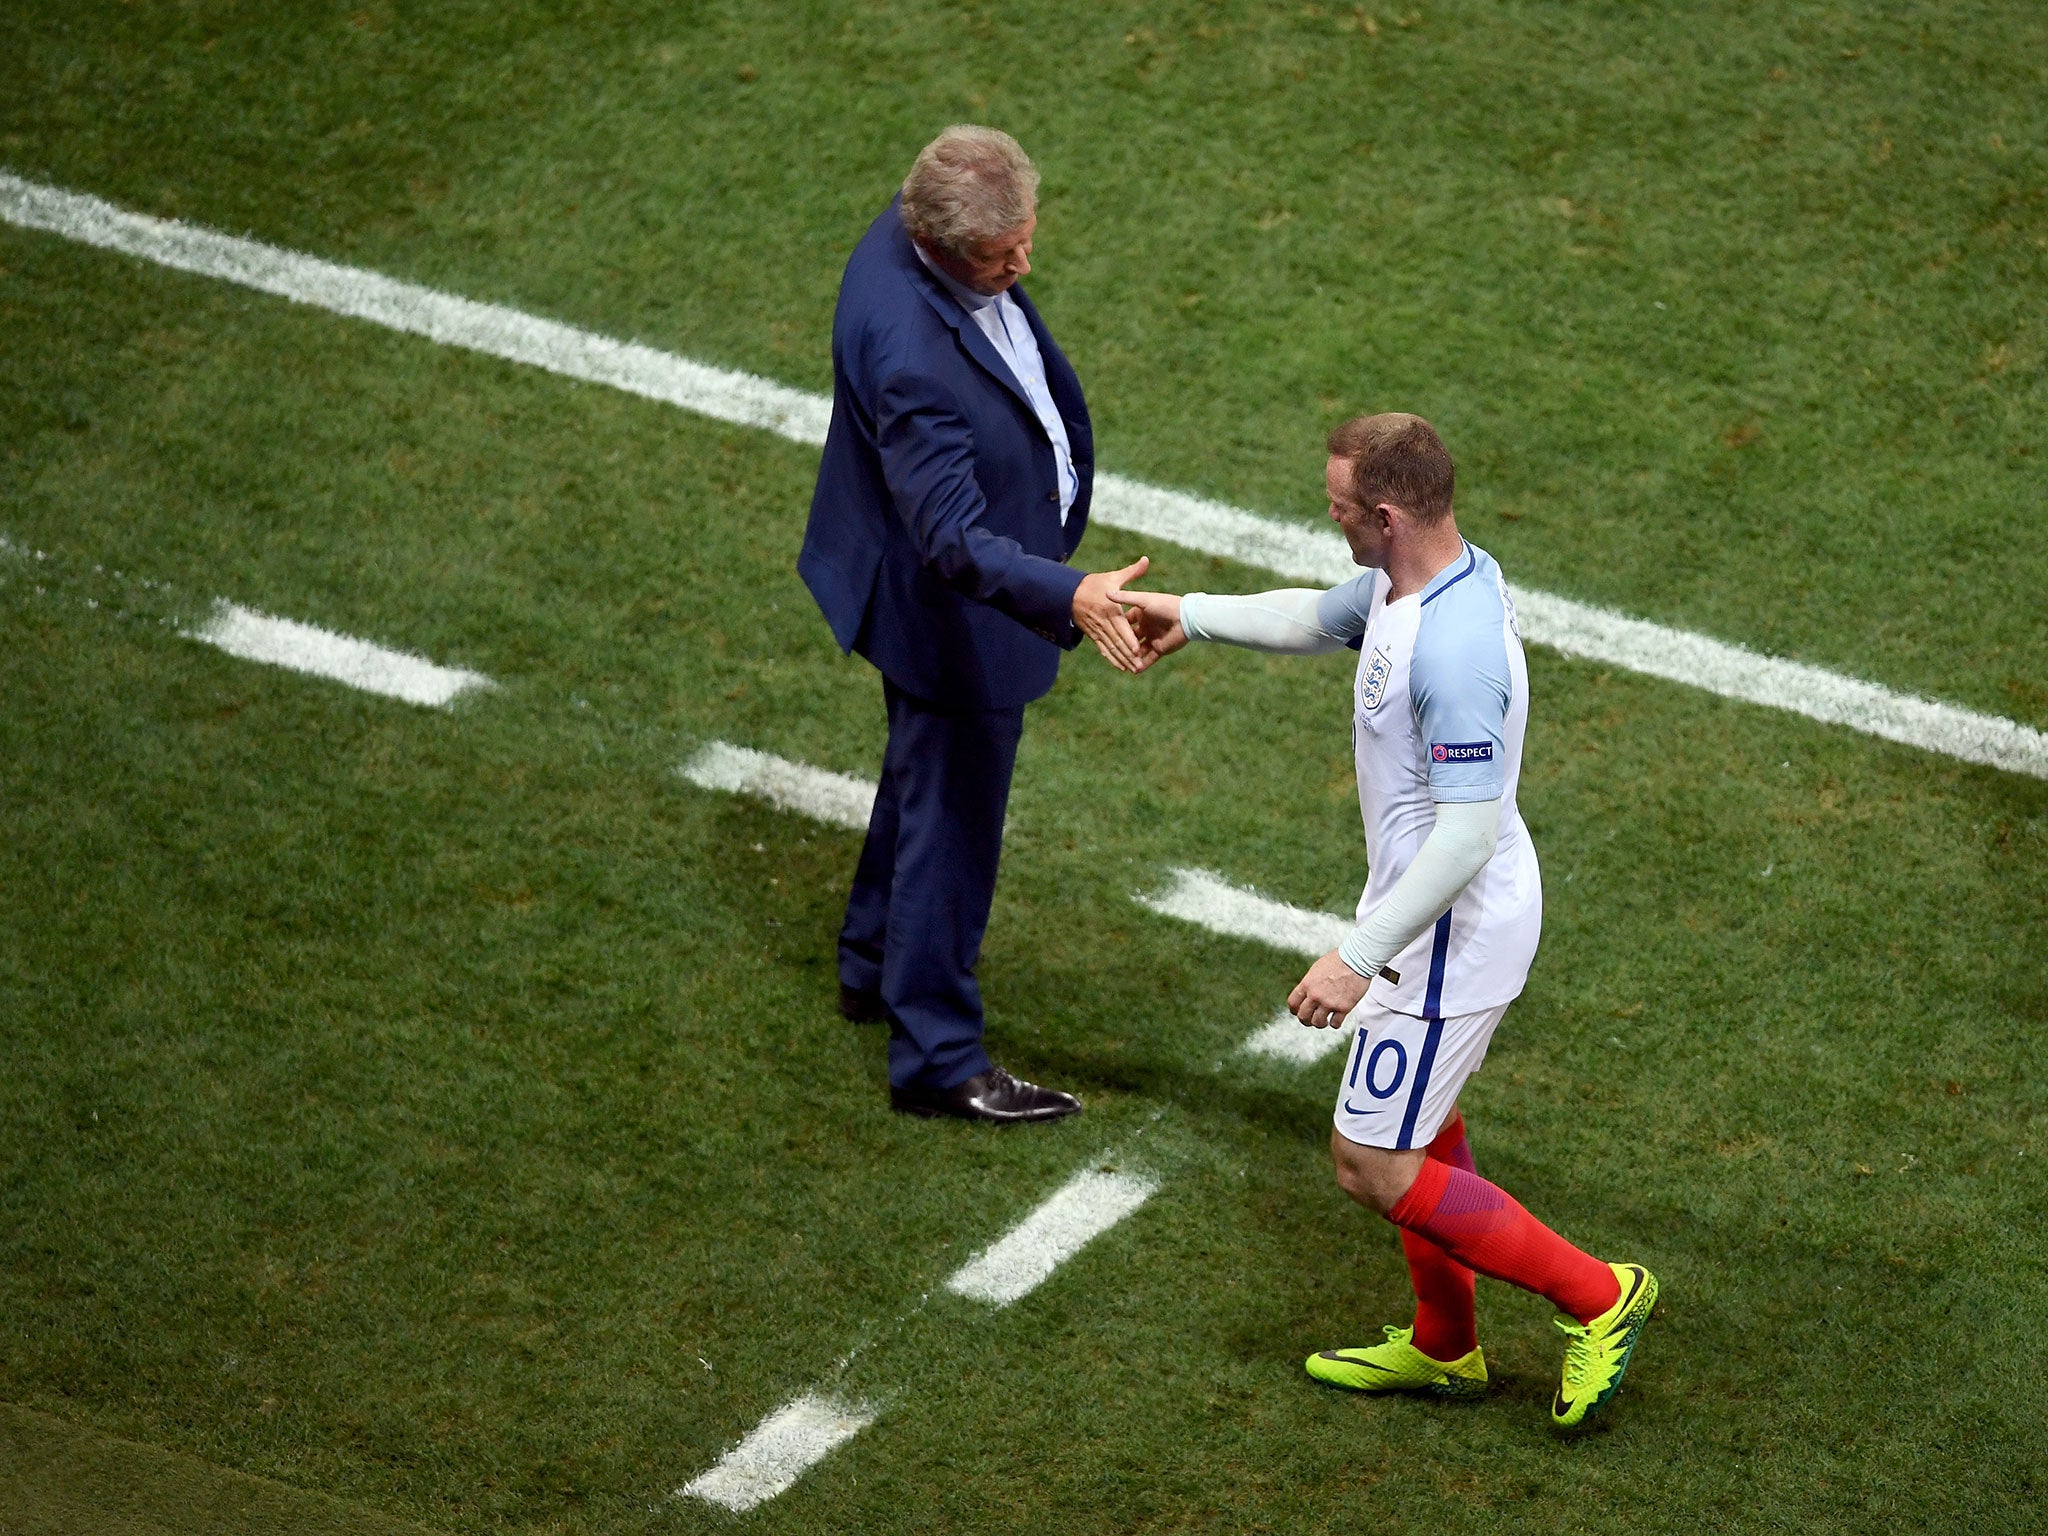 Wayne Rooney said Hodgson addressed the players to tell them he was leaving (Getty)